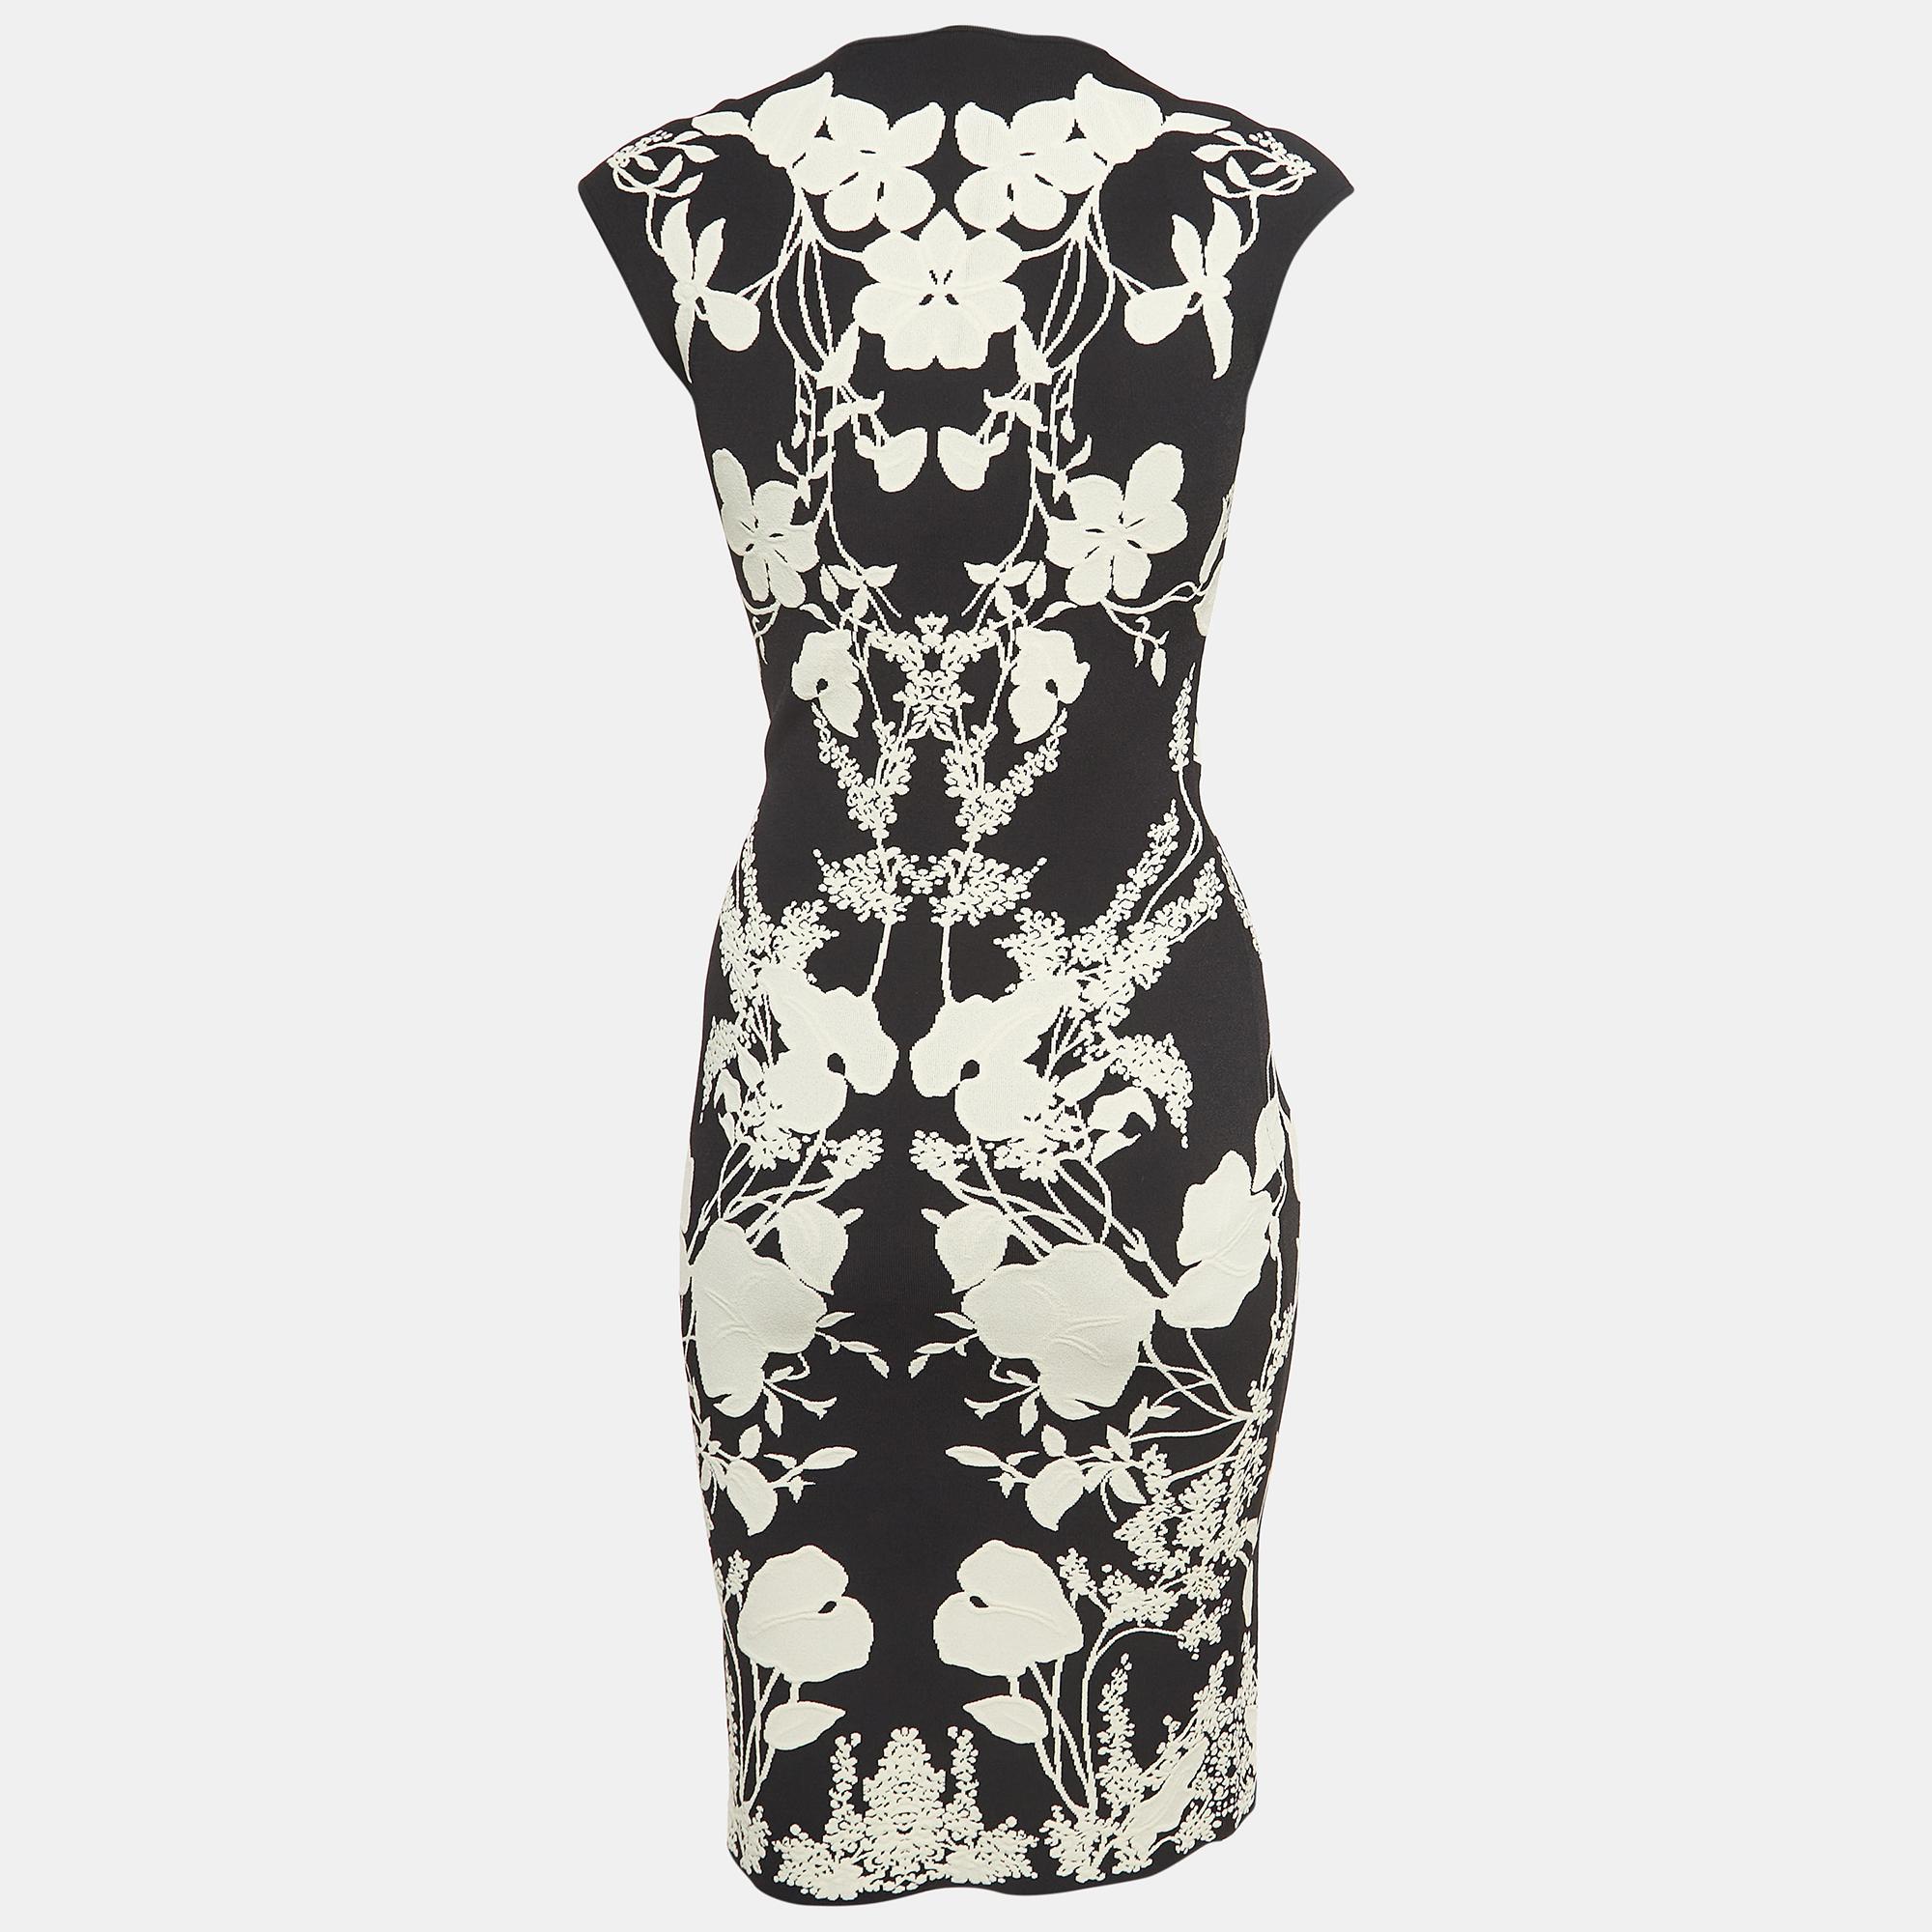 Meticulously crafted for a flawless fit, this Alexander McQueen dress offers unparalleled comfort with its premium materials. Its timeless design makes it a versatile choice for any event, exuding elegance effortlessly.

Includes: Tag